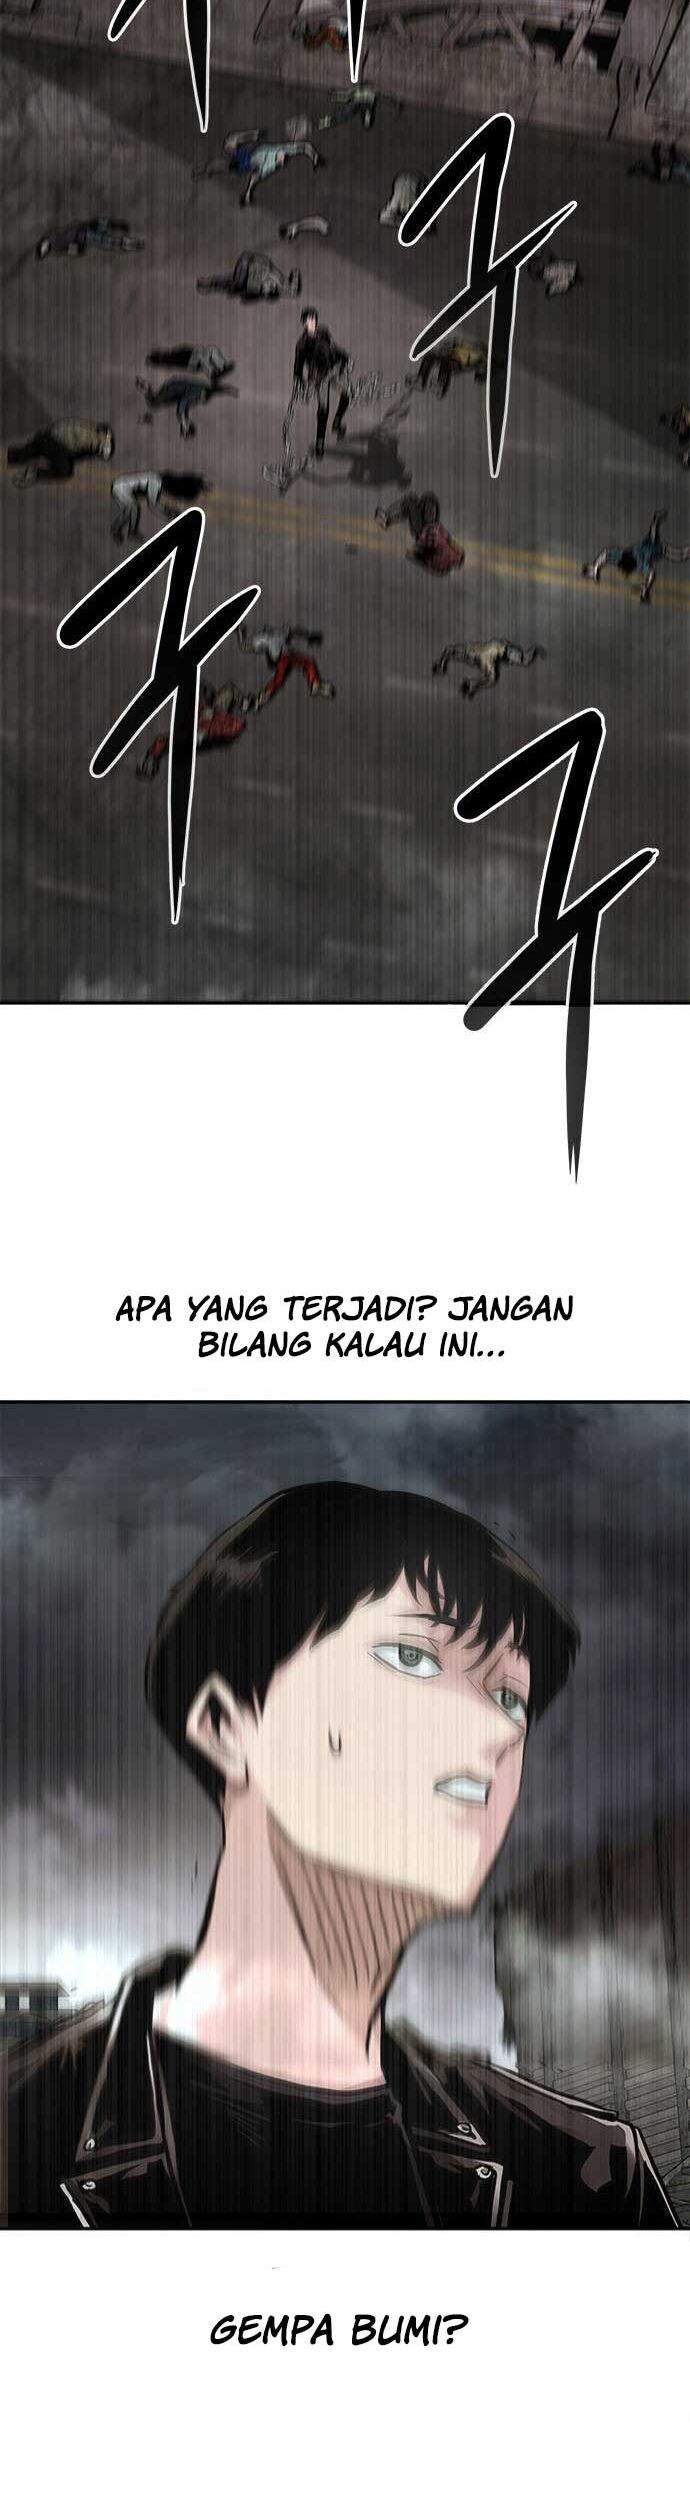 All Rounder Chapter 01